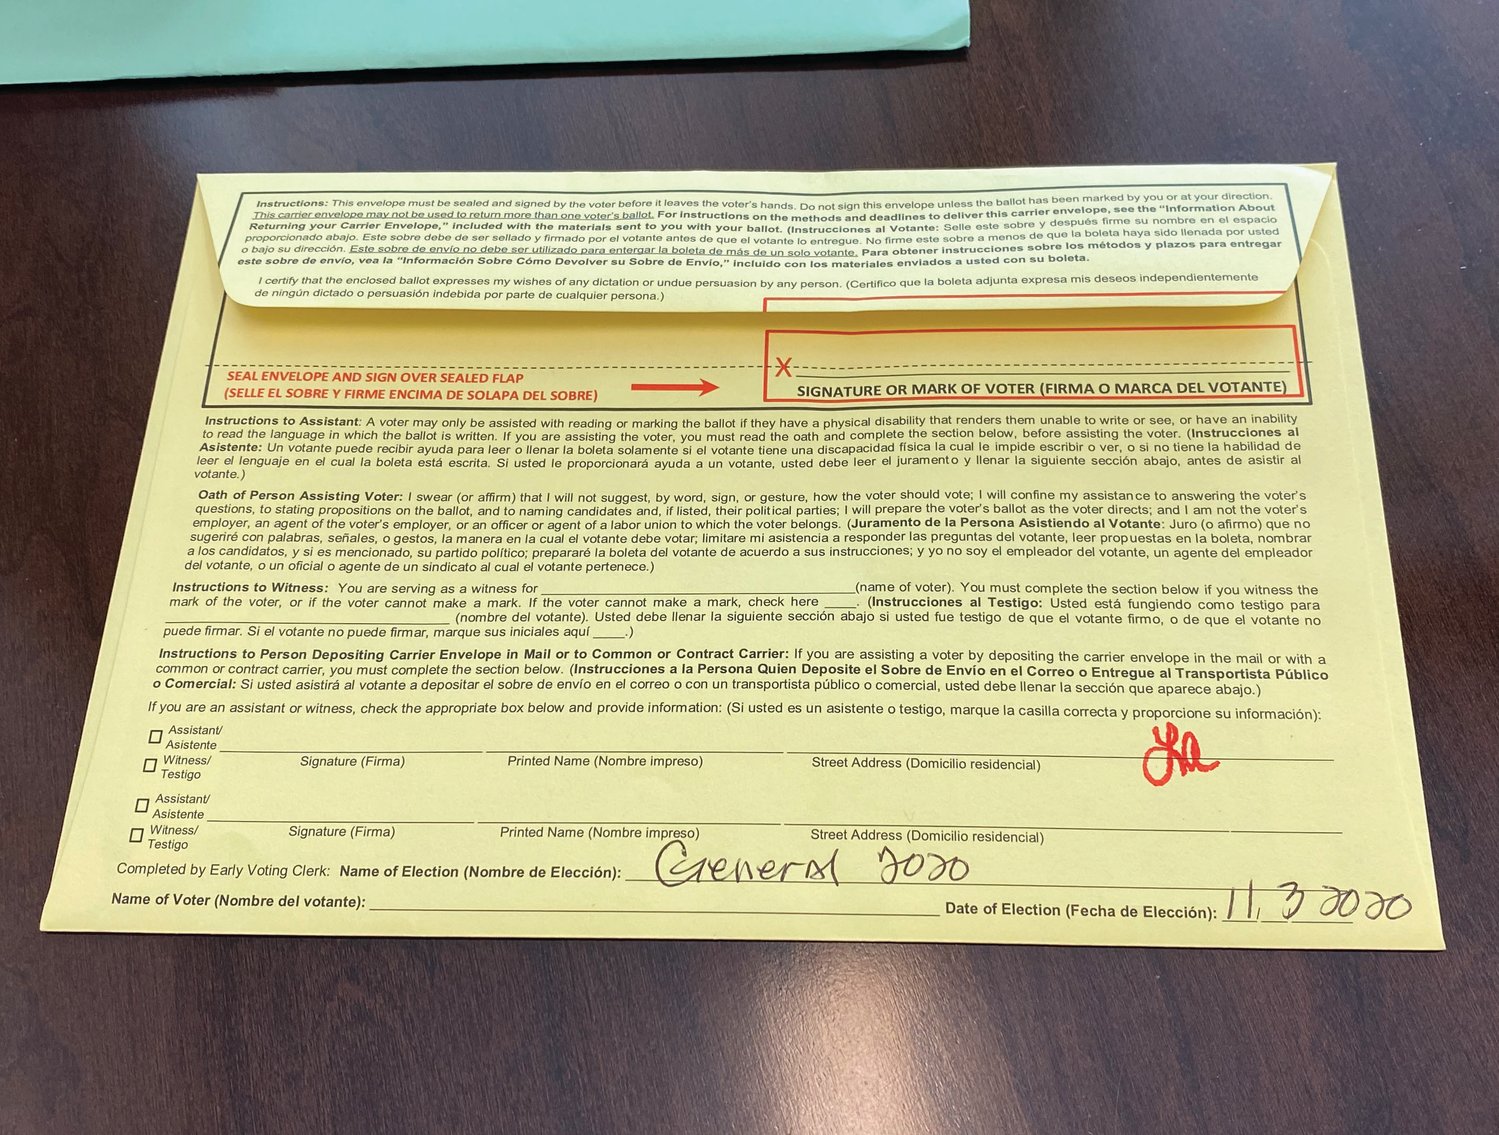 Corrected ballots will have a red “LA,” which are the County Clerk’s initials, stamped on the ballot itself as well as its envelope. A notice detailing the mistake and instructions for how to proceed is also included.